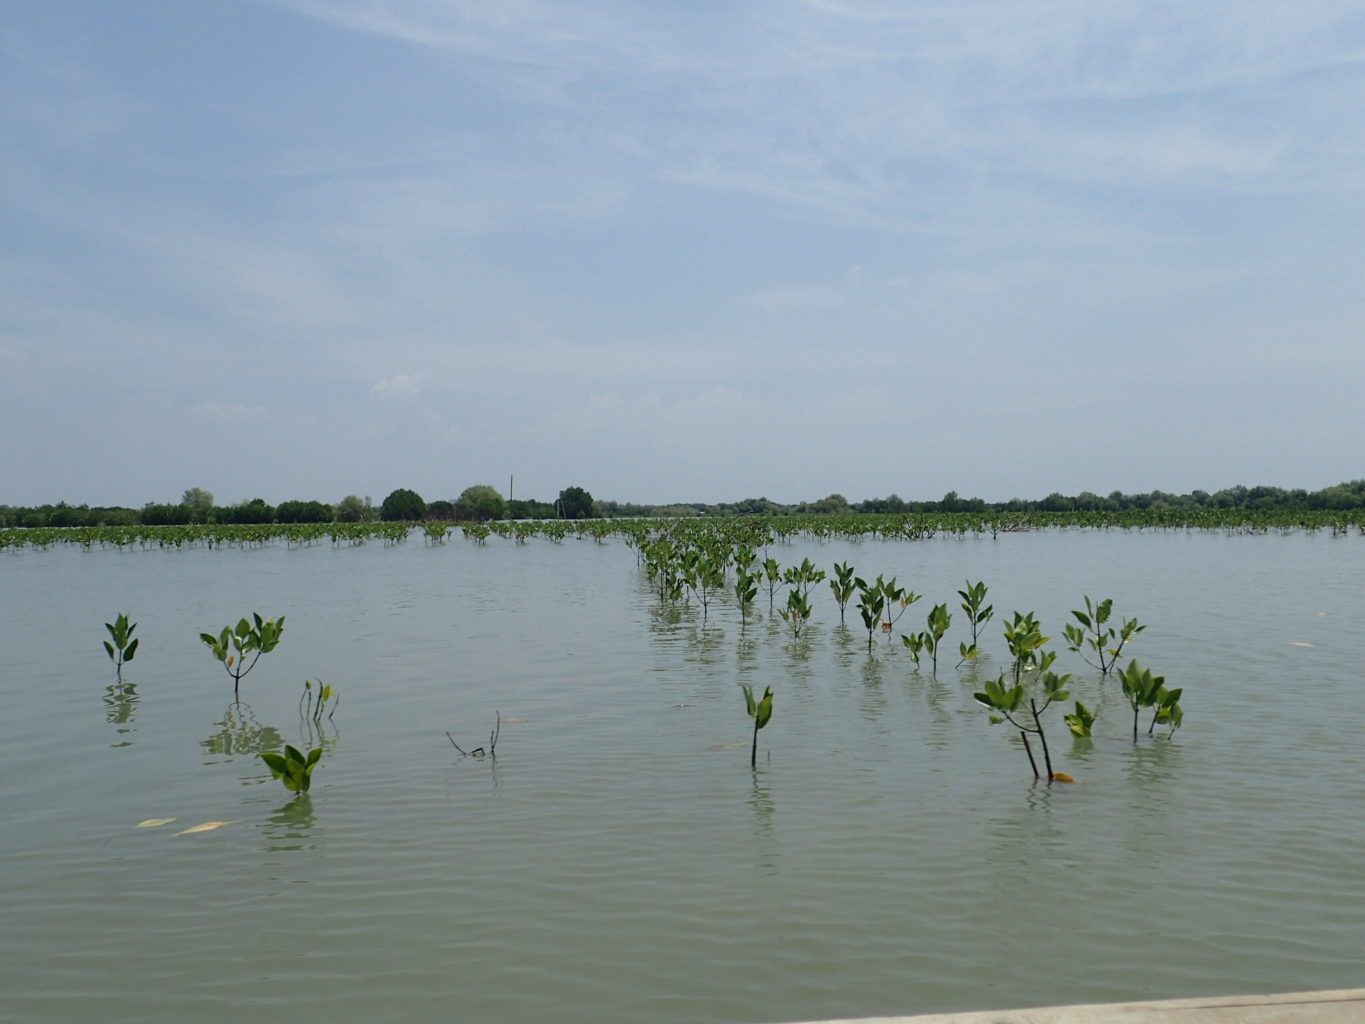 Mangroves planted by residents of Panthai Bahagia, Java, Indonesia